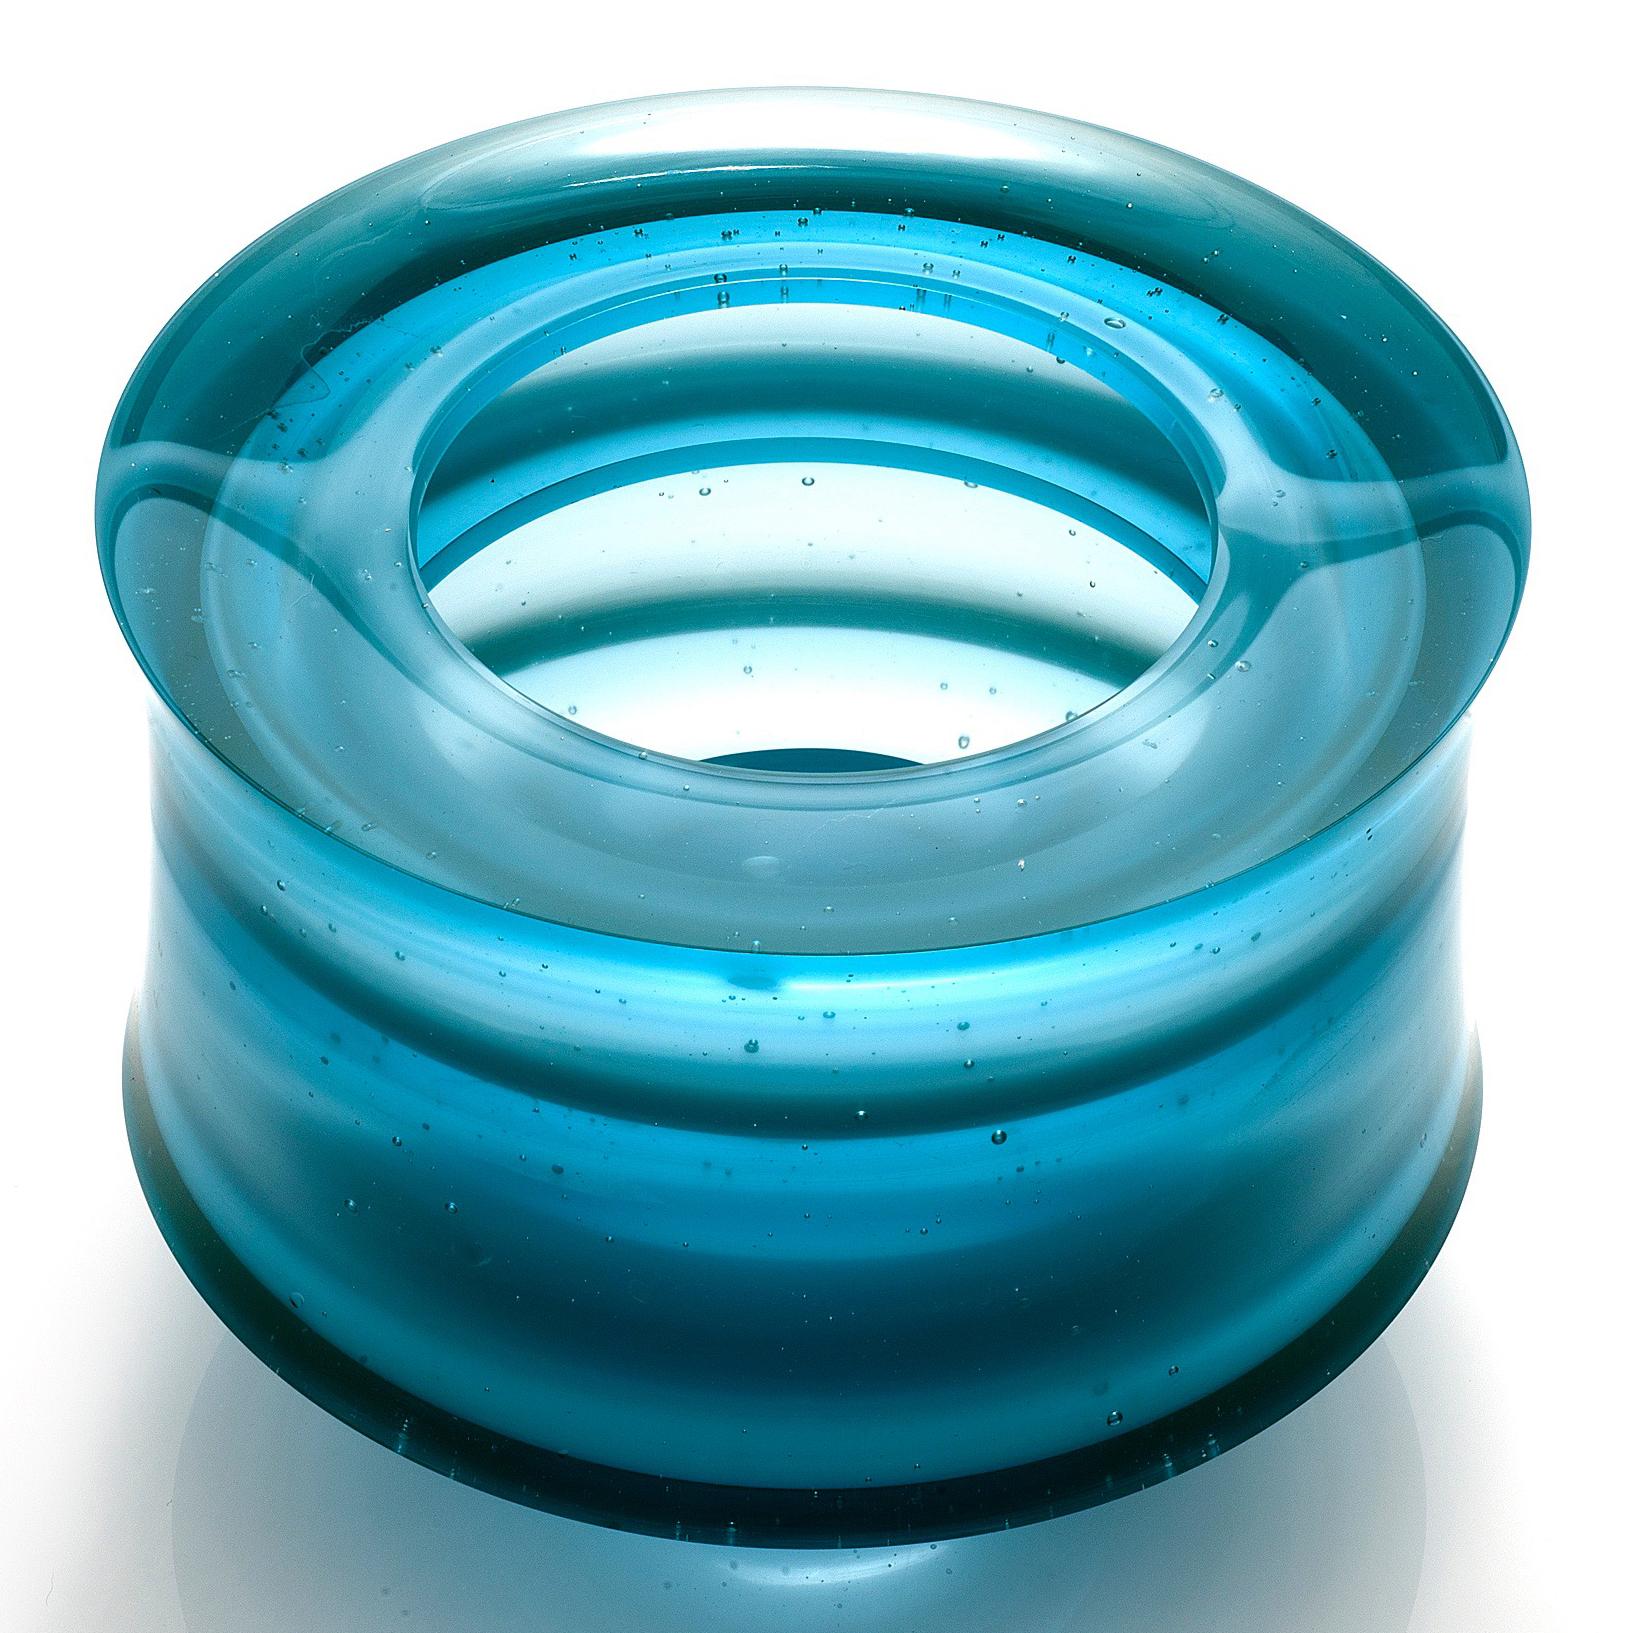 Corymb, a Unique Aqua/Turquoise Glass Art Work and Centrepiece by Paul Stopler 1